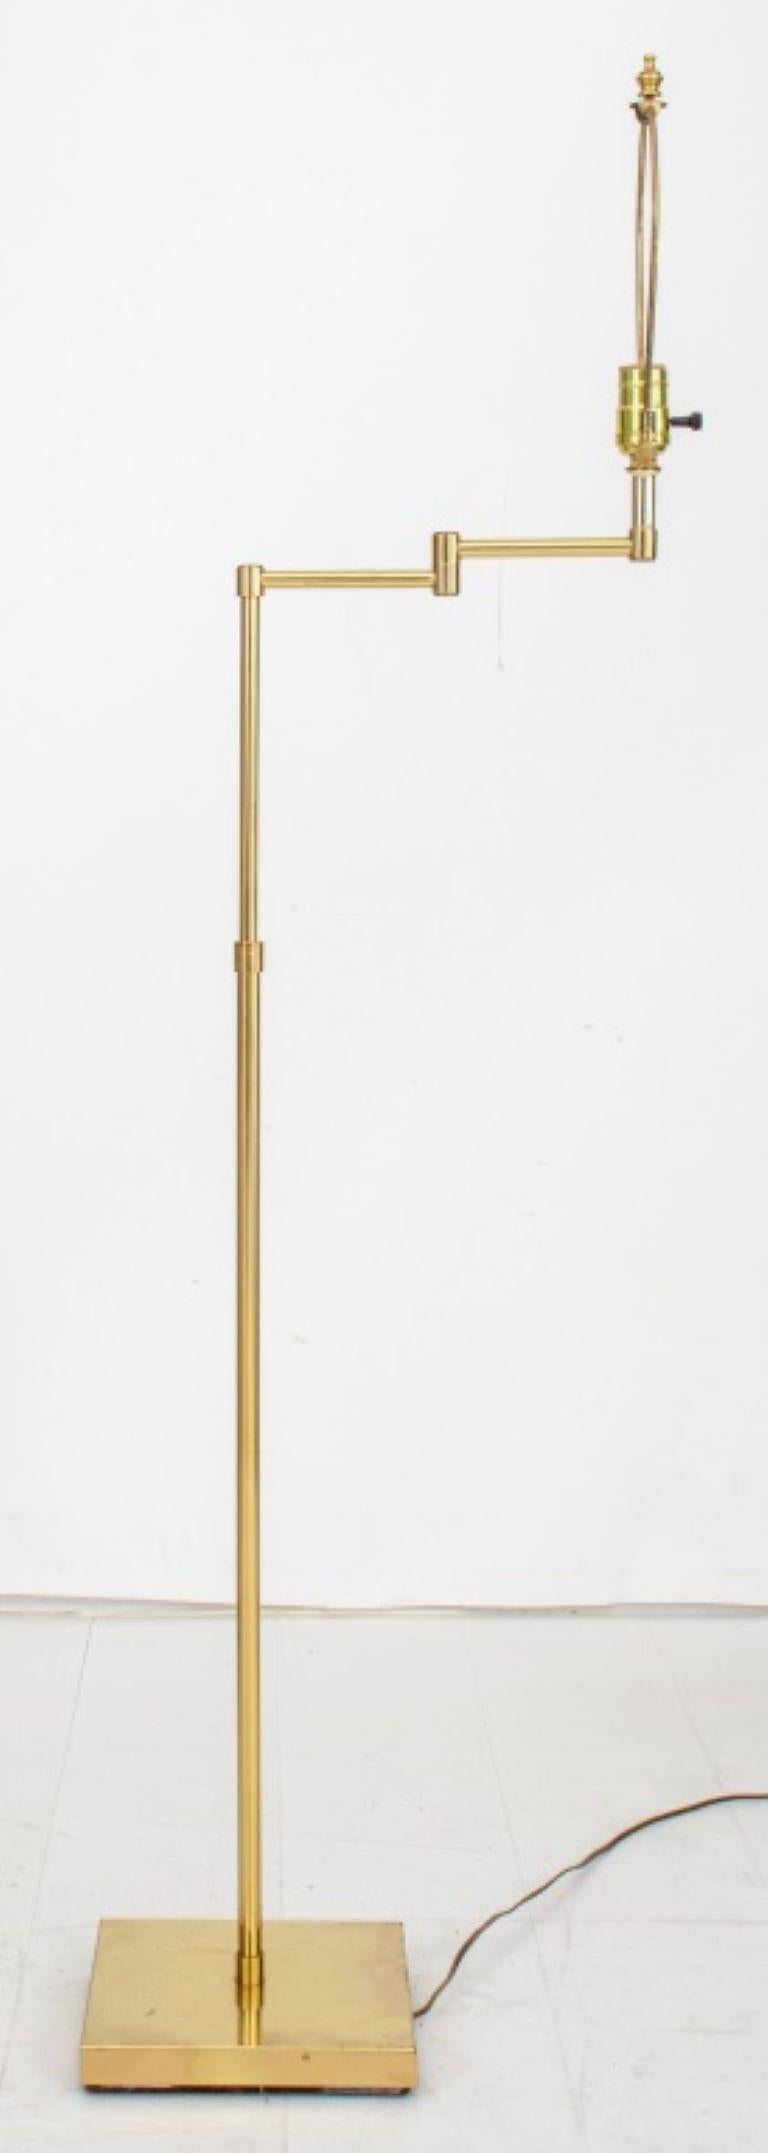 Brass Swing-Arm Floor Lamp In Excellent Condition For Sale In New York, NY